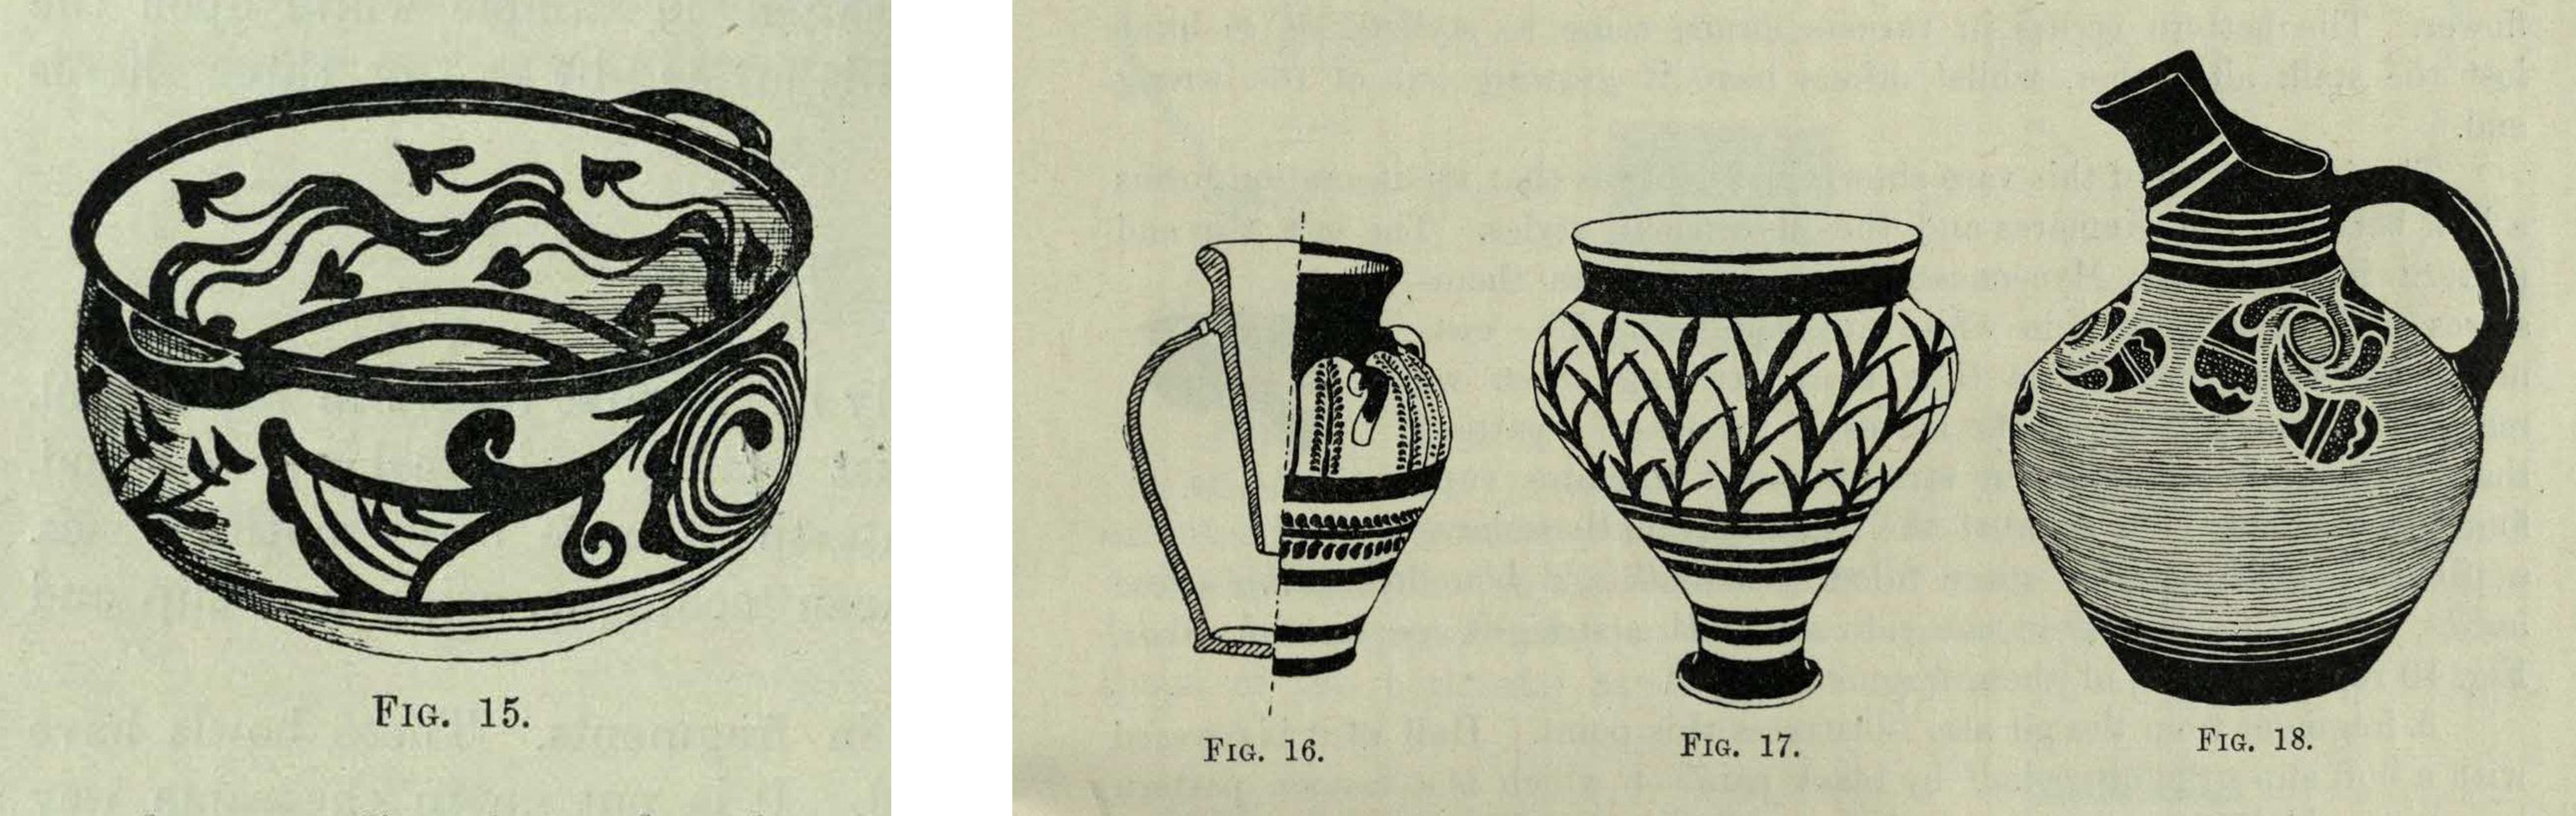 Examples of some of the Mycenaean ware found at Zakro, on the east coast of Crete, in excavations carried out in 1902. From R. M. Dawkins’ (1871-1955) article ‘Pottery from Zakro’, published in The Journal of Hellenic Studies (vol. 23, 1903).